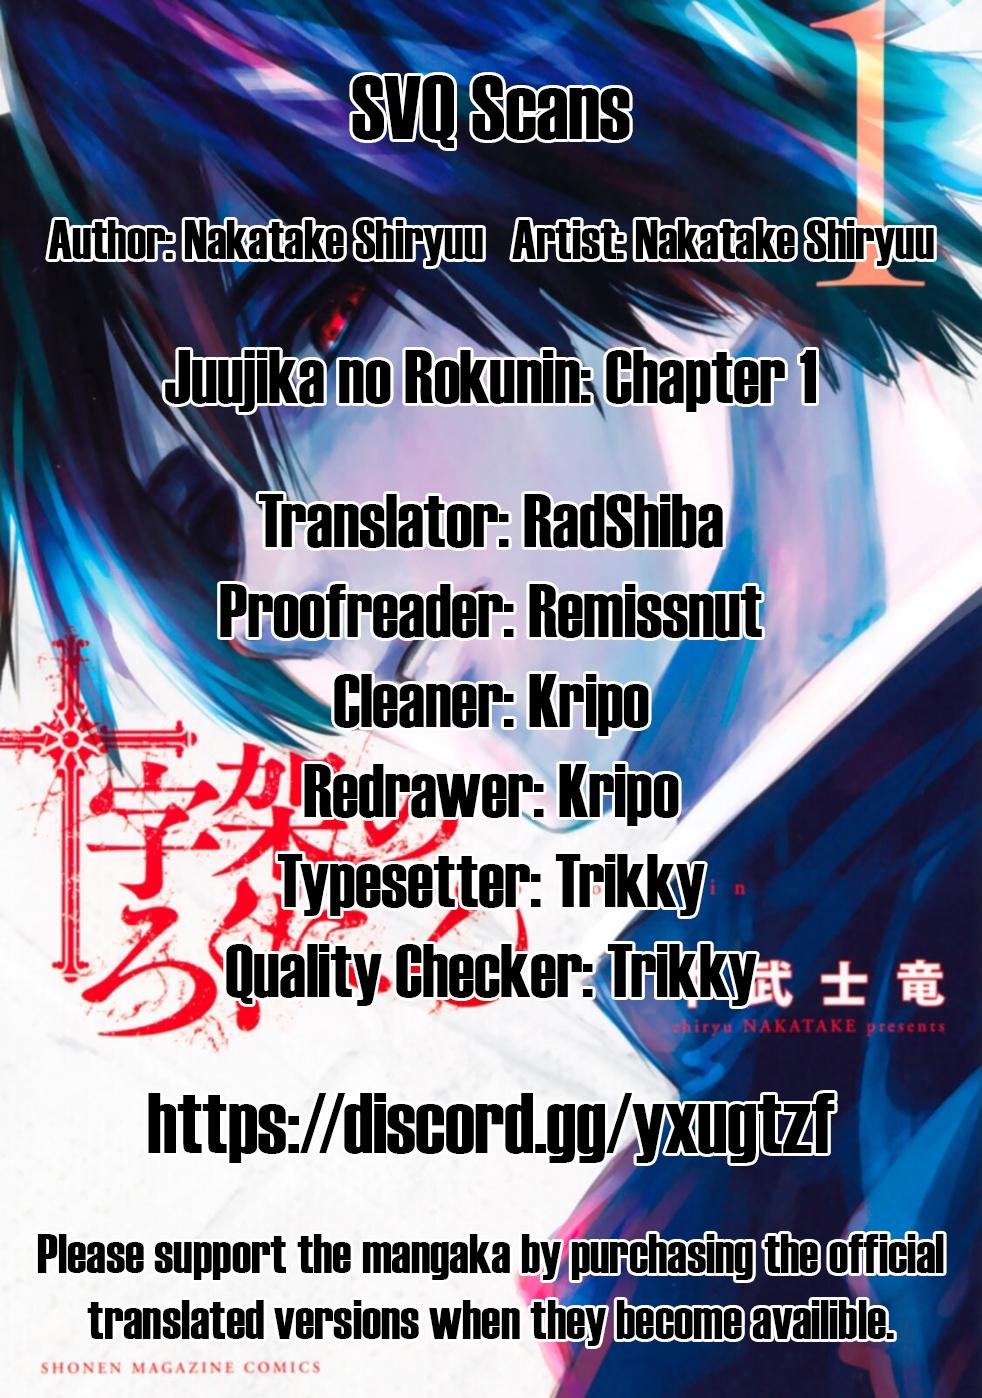 Juujika No Rokunin Ch 1 Juujika no Rokunin, Chapter 1 | TcbScans Net - TCBscans - Free Manga Online  in High Quality